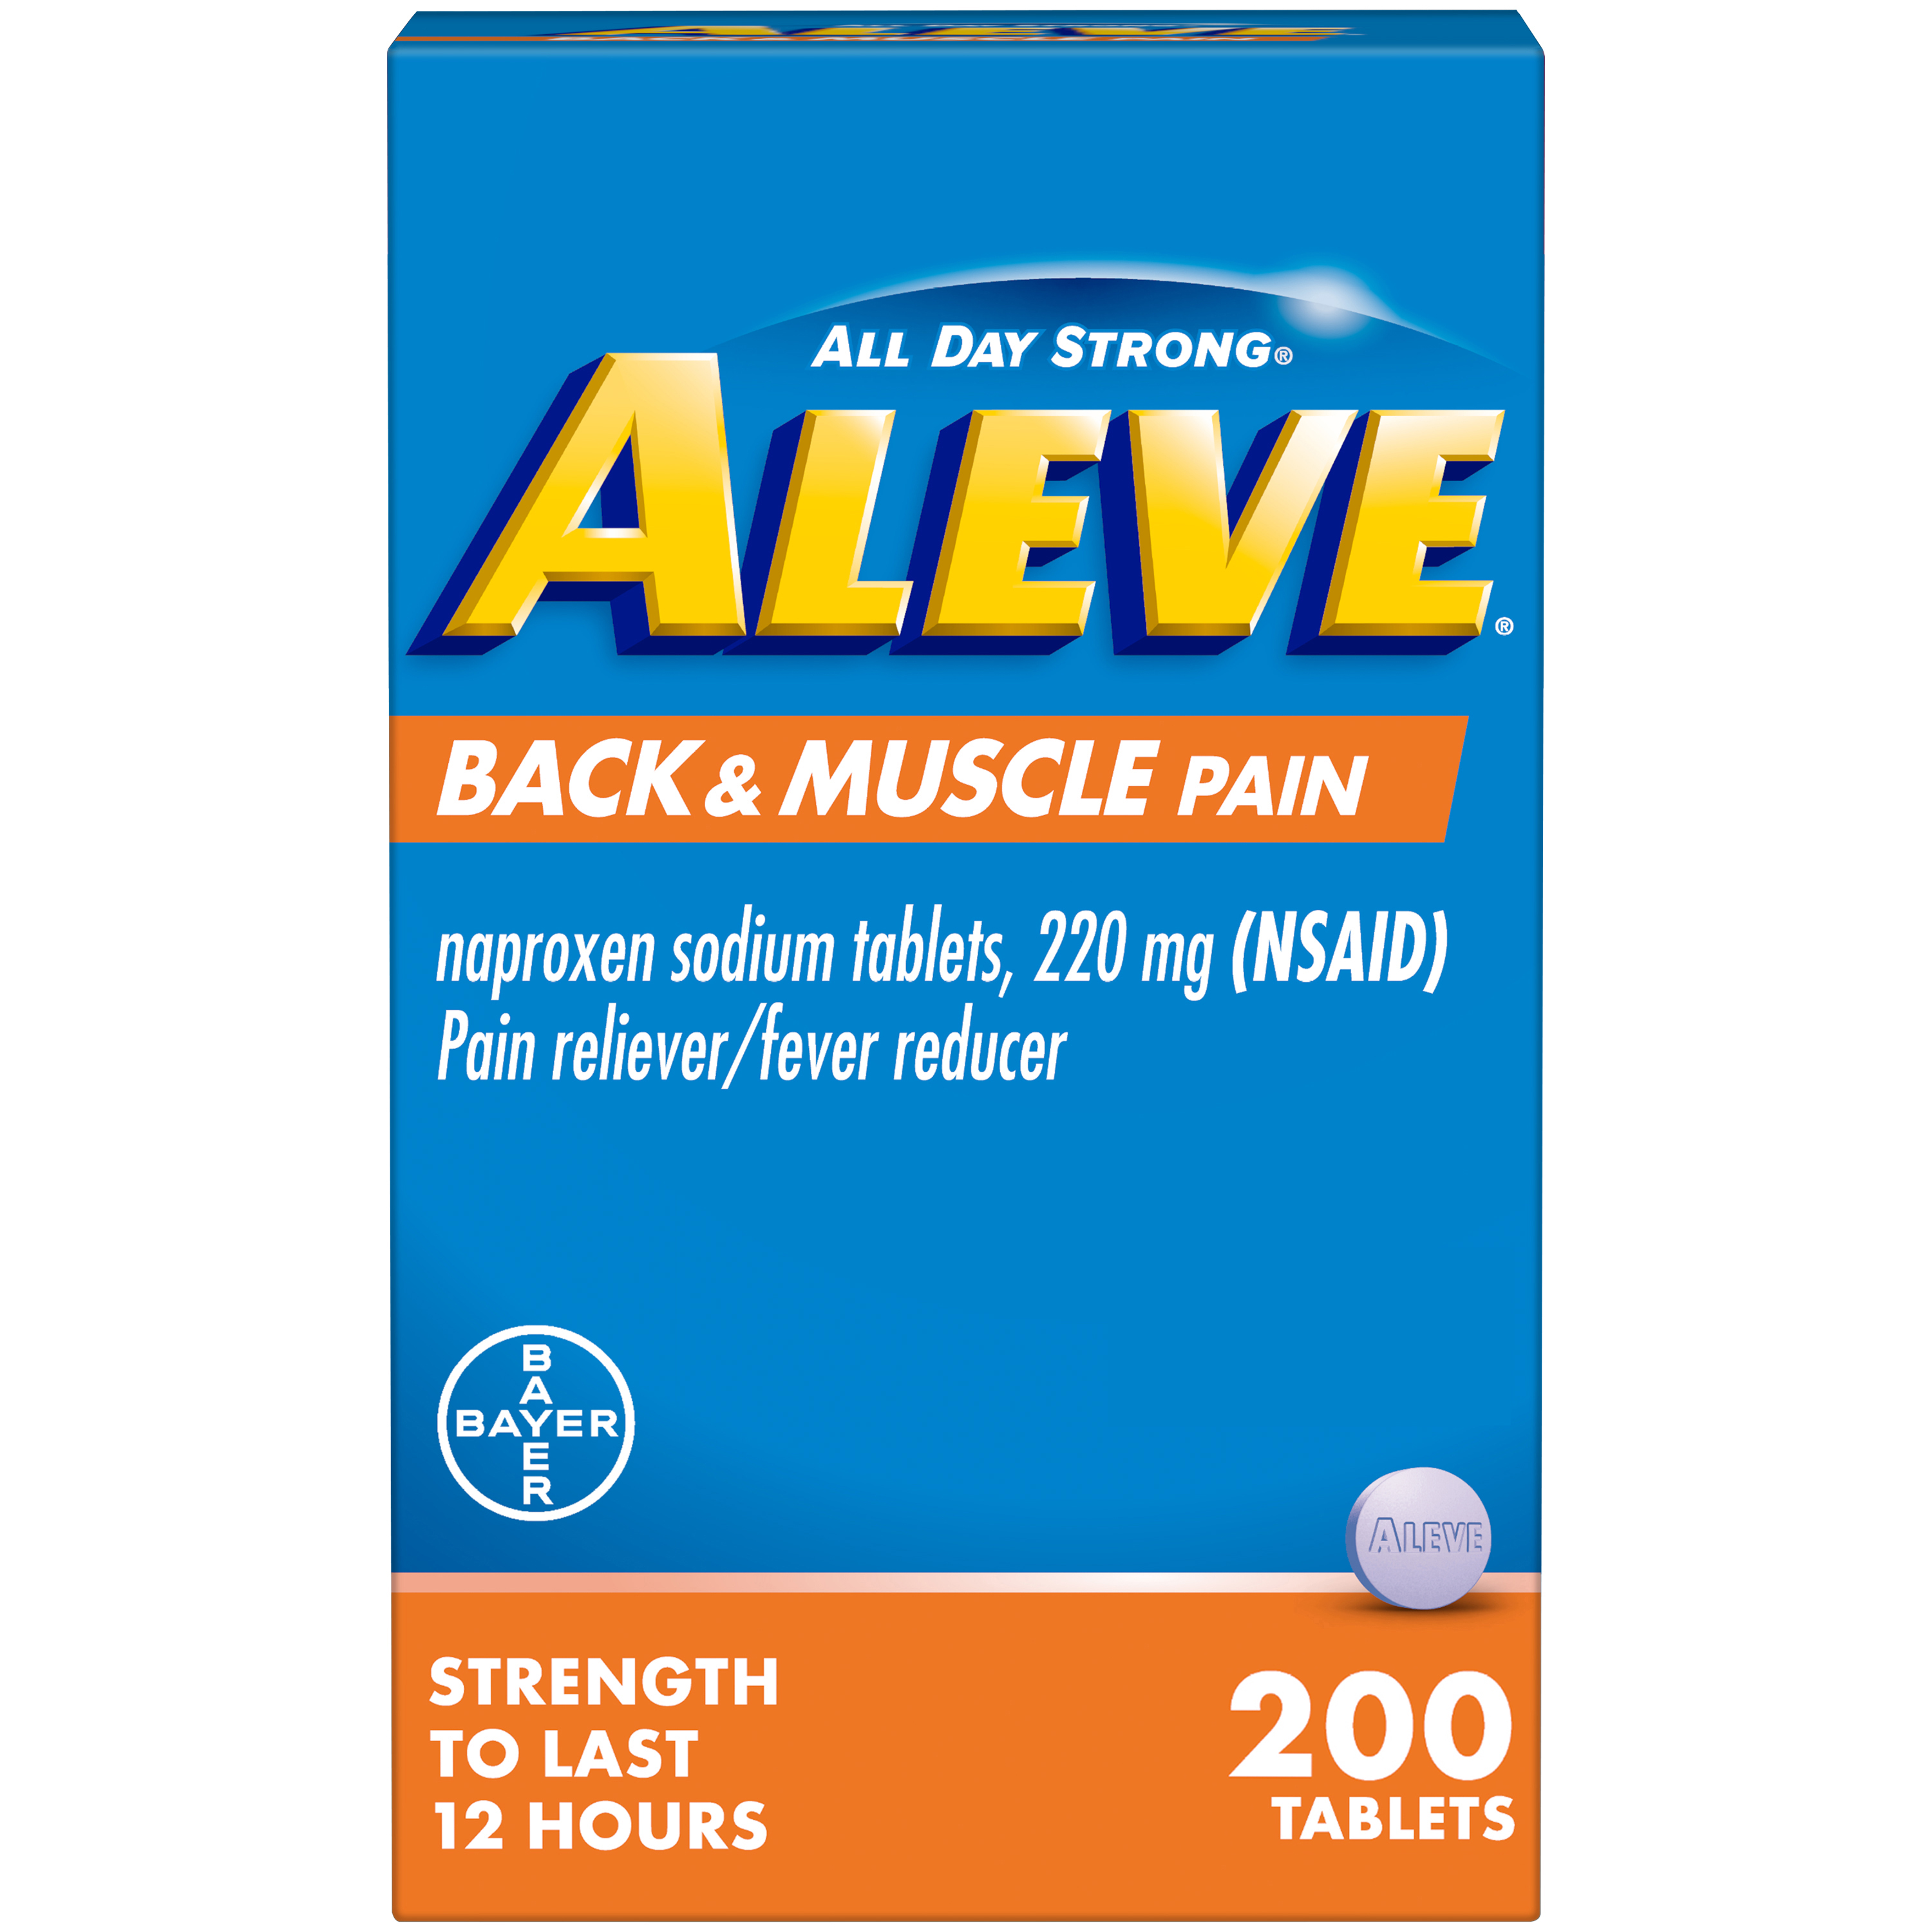 Aleve Back & Muscle Pain Reliever Naproxen Sodium Tablets, 200 Count - image 2 of 15